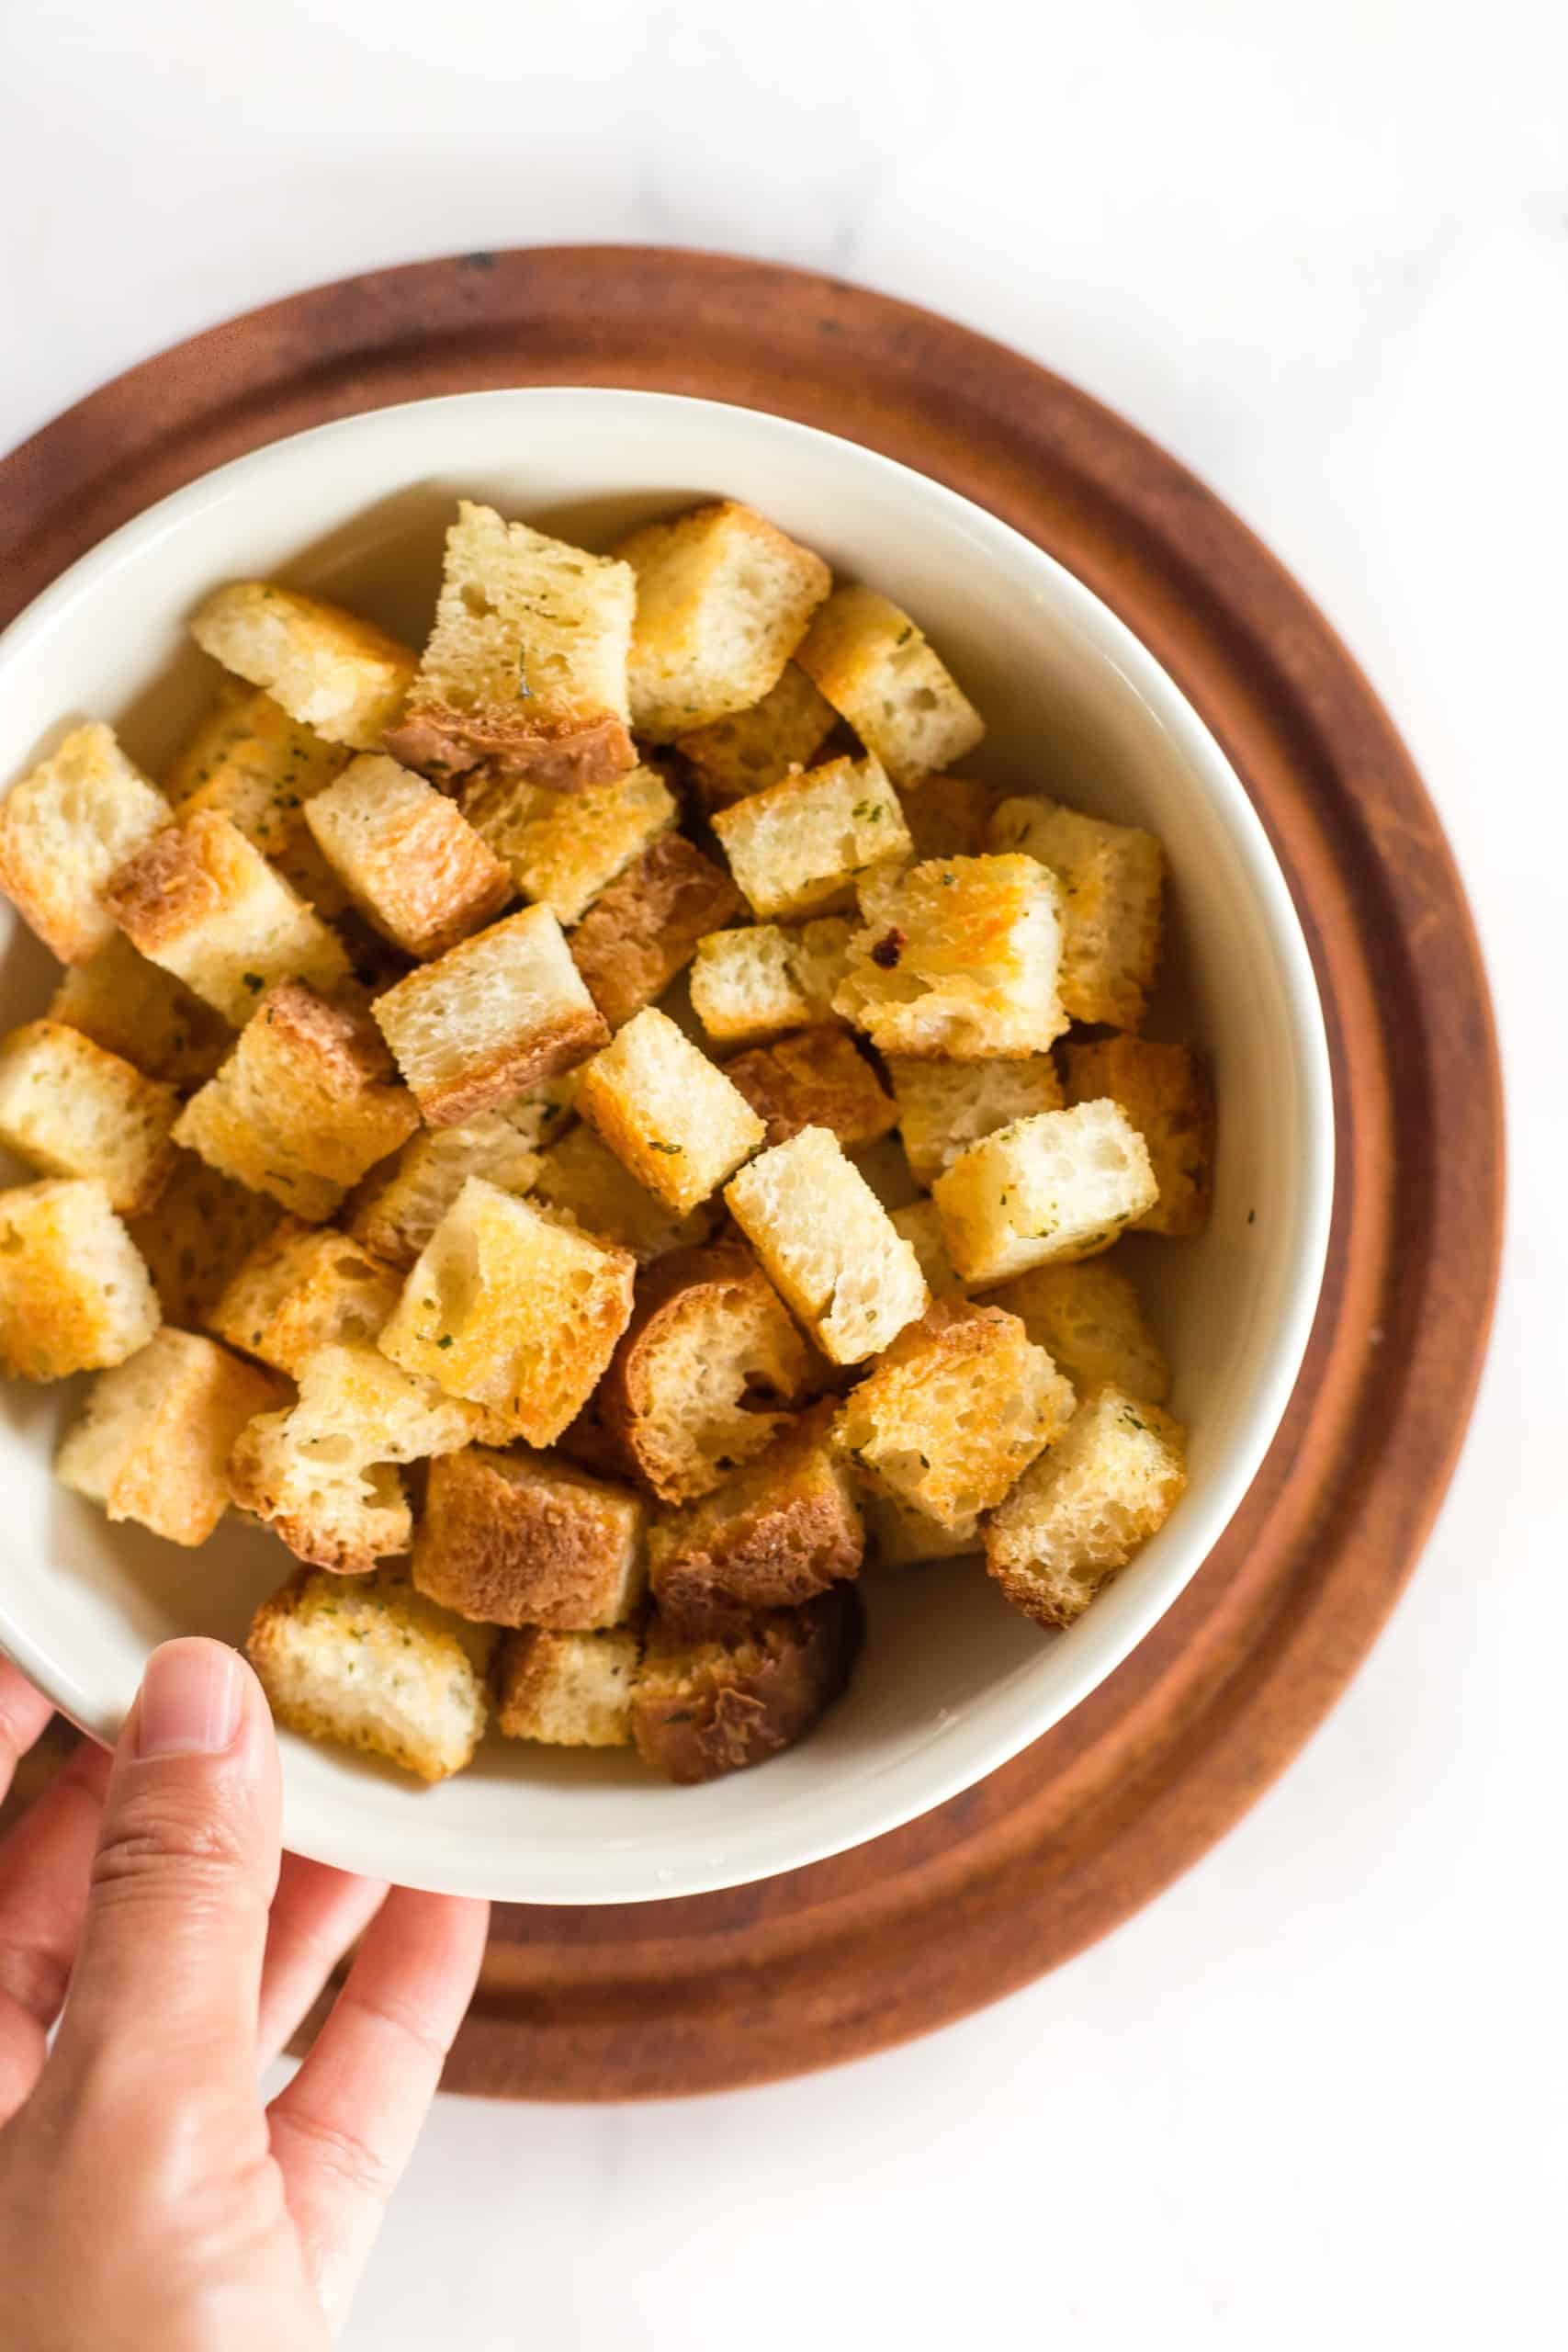 Hand reaching for a bowl of homemade gluten-free croutons.